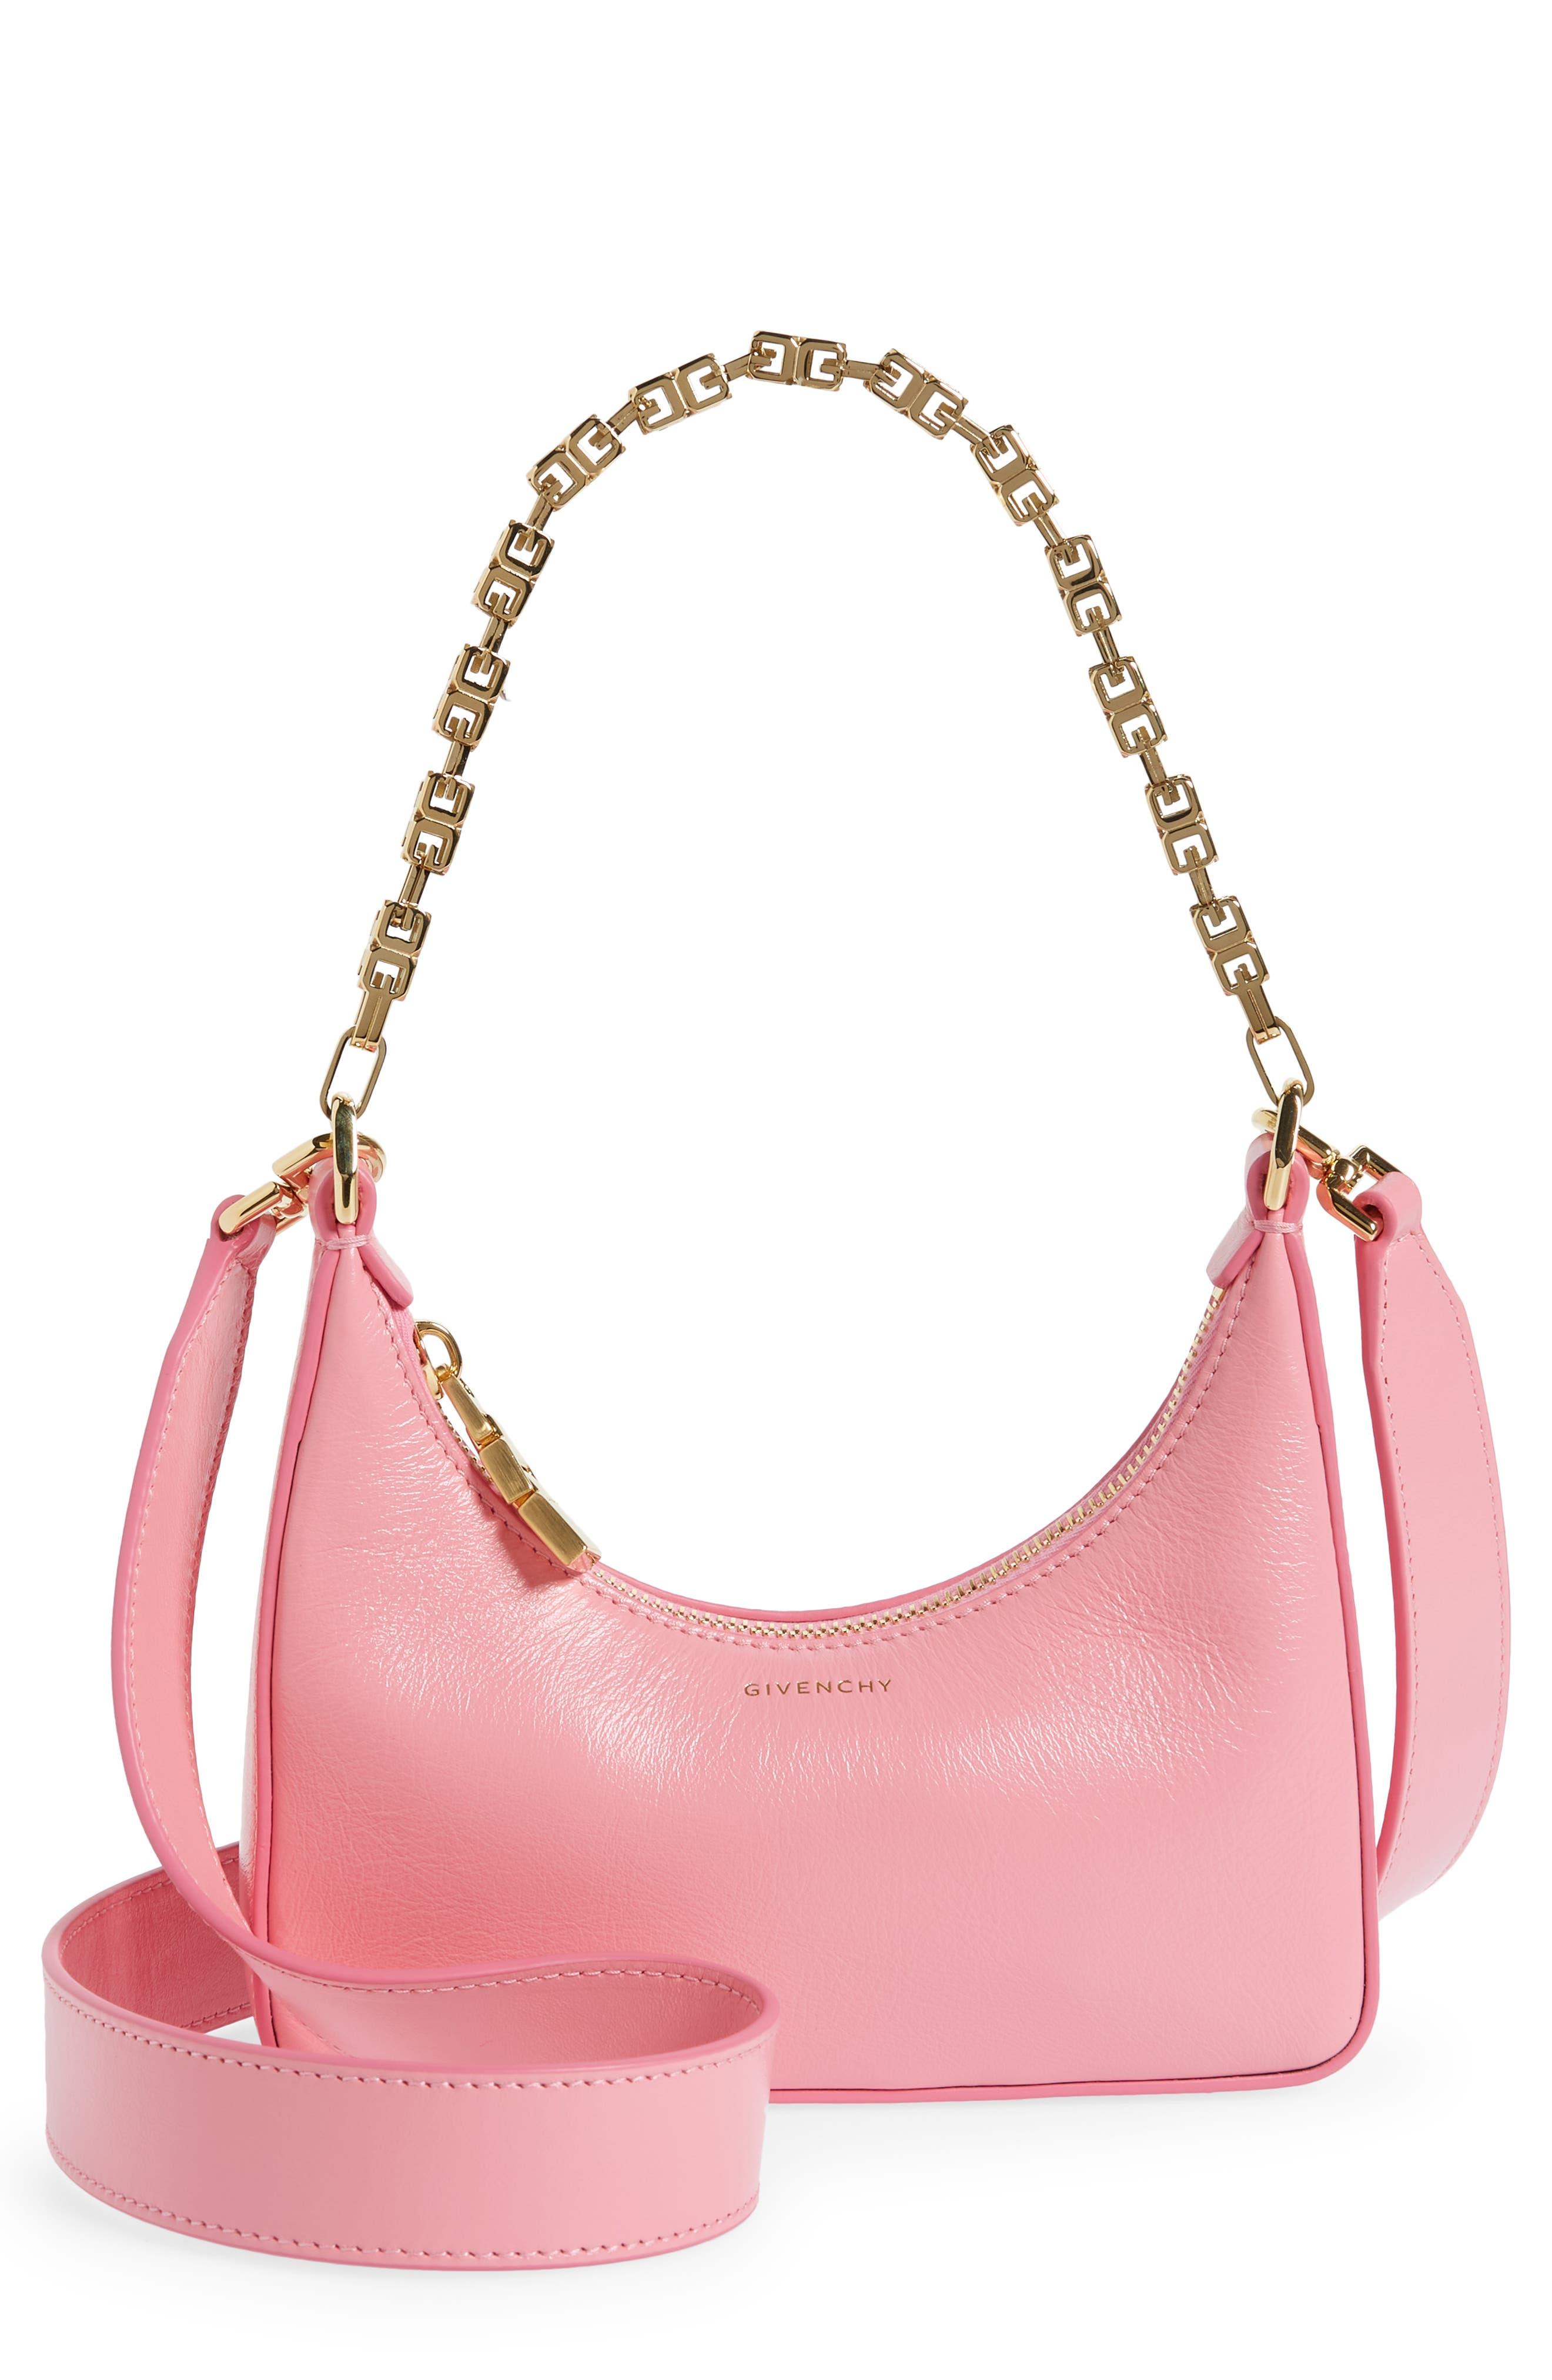 Givenchy Mini Moon Cutout Leather Hobo Bag in Pink | Lyst